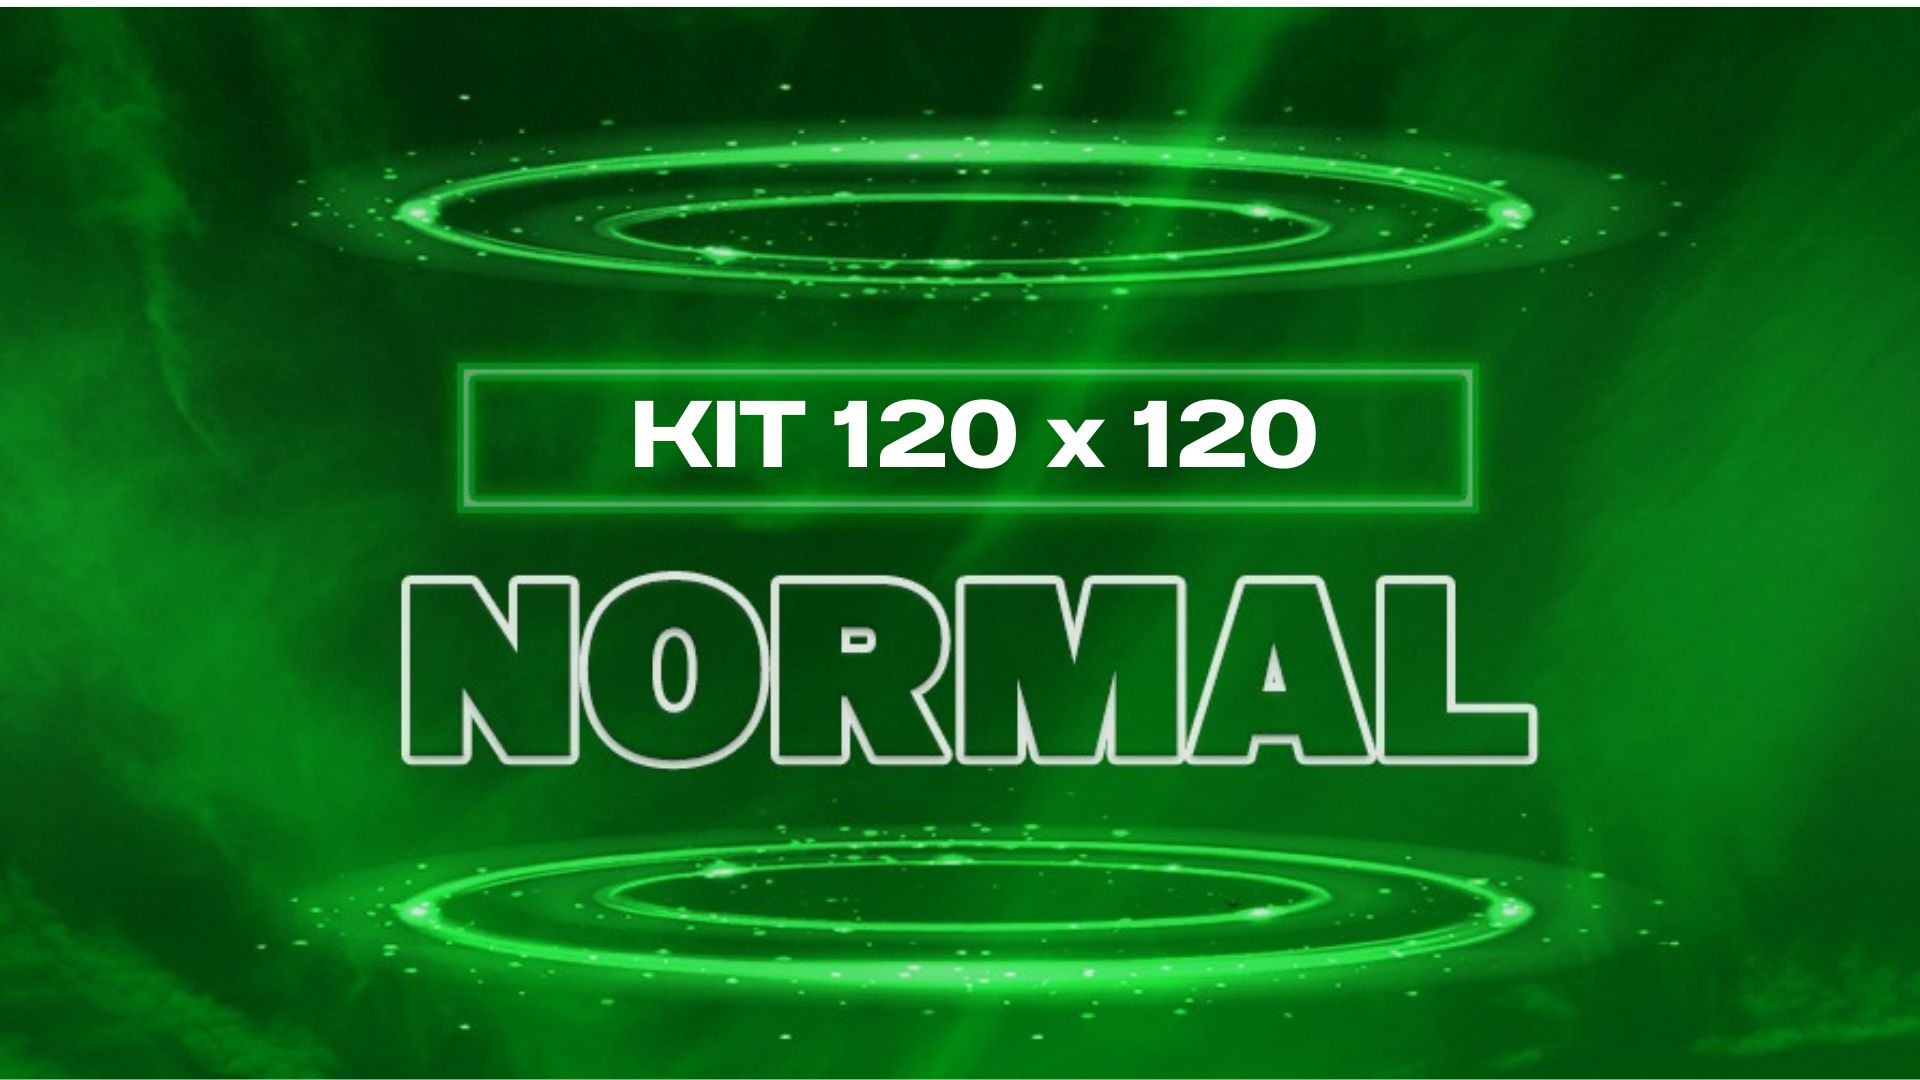 Kit-120-X-120-Norm